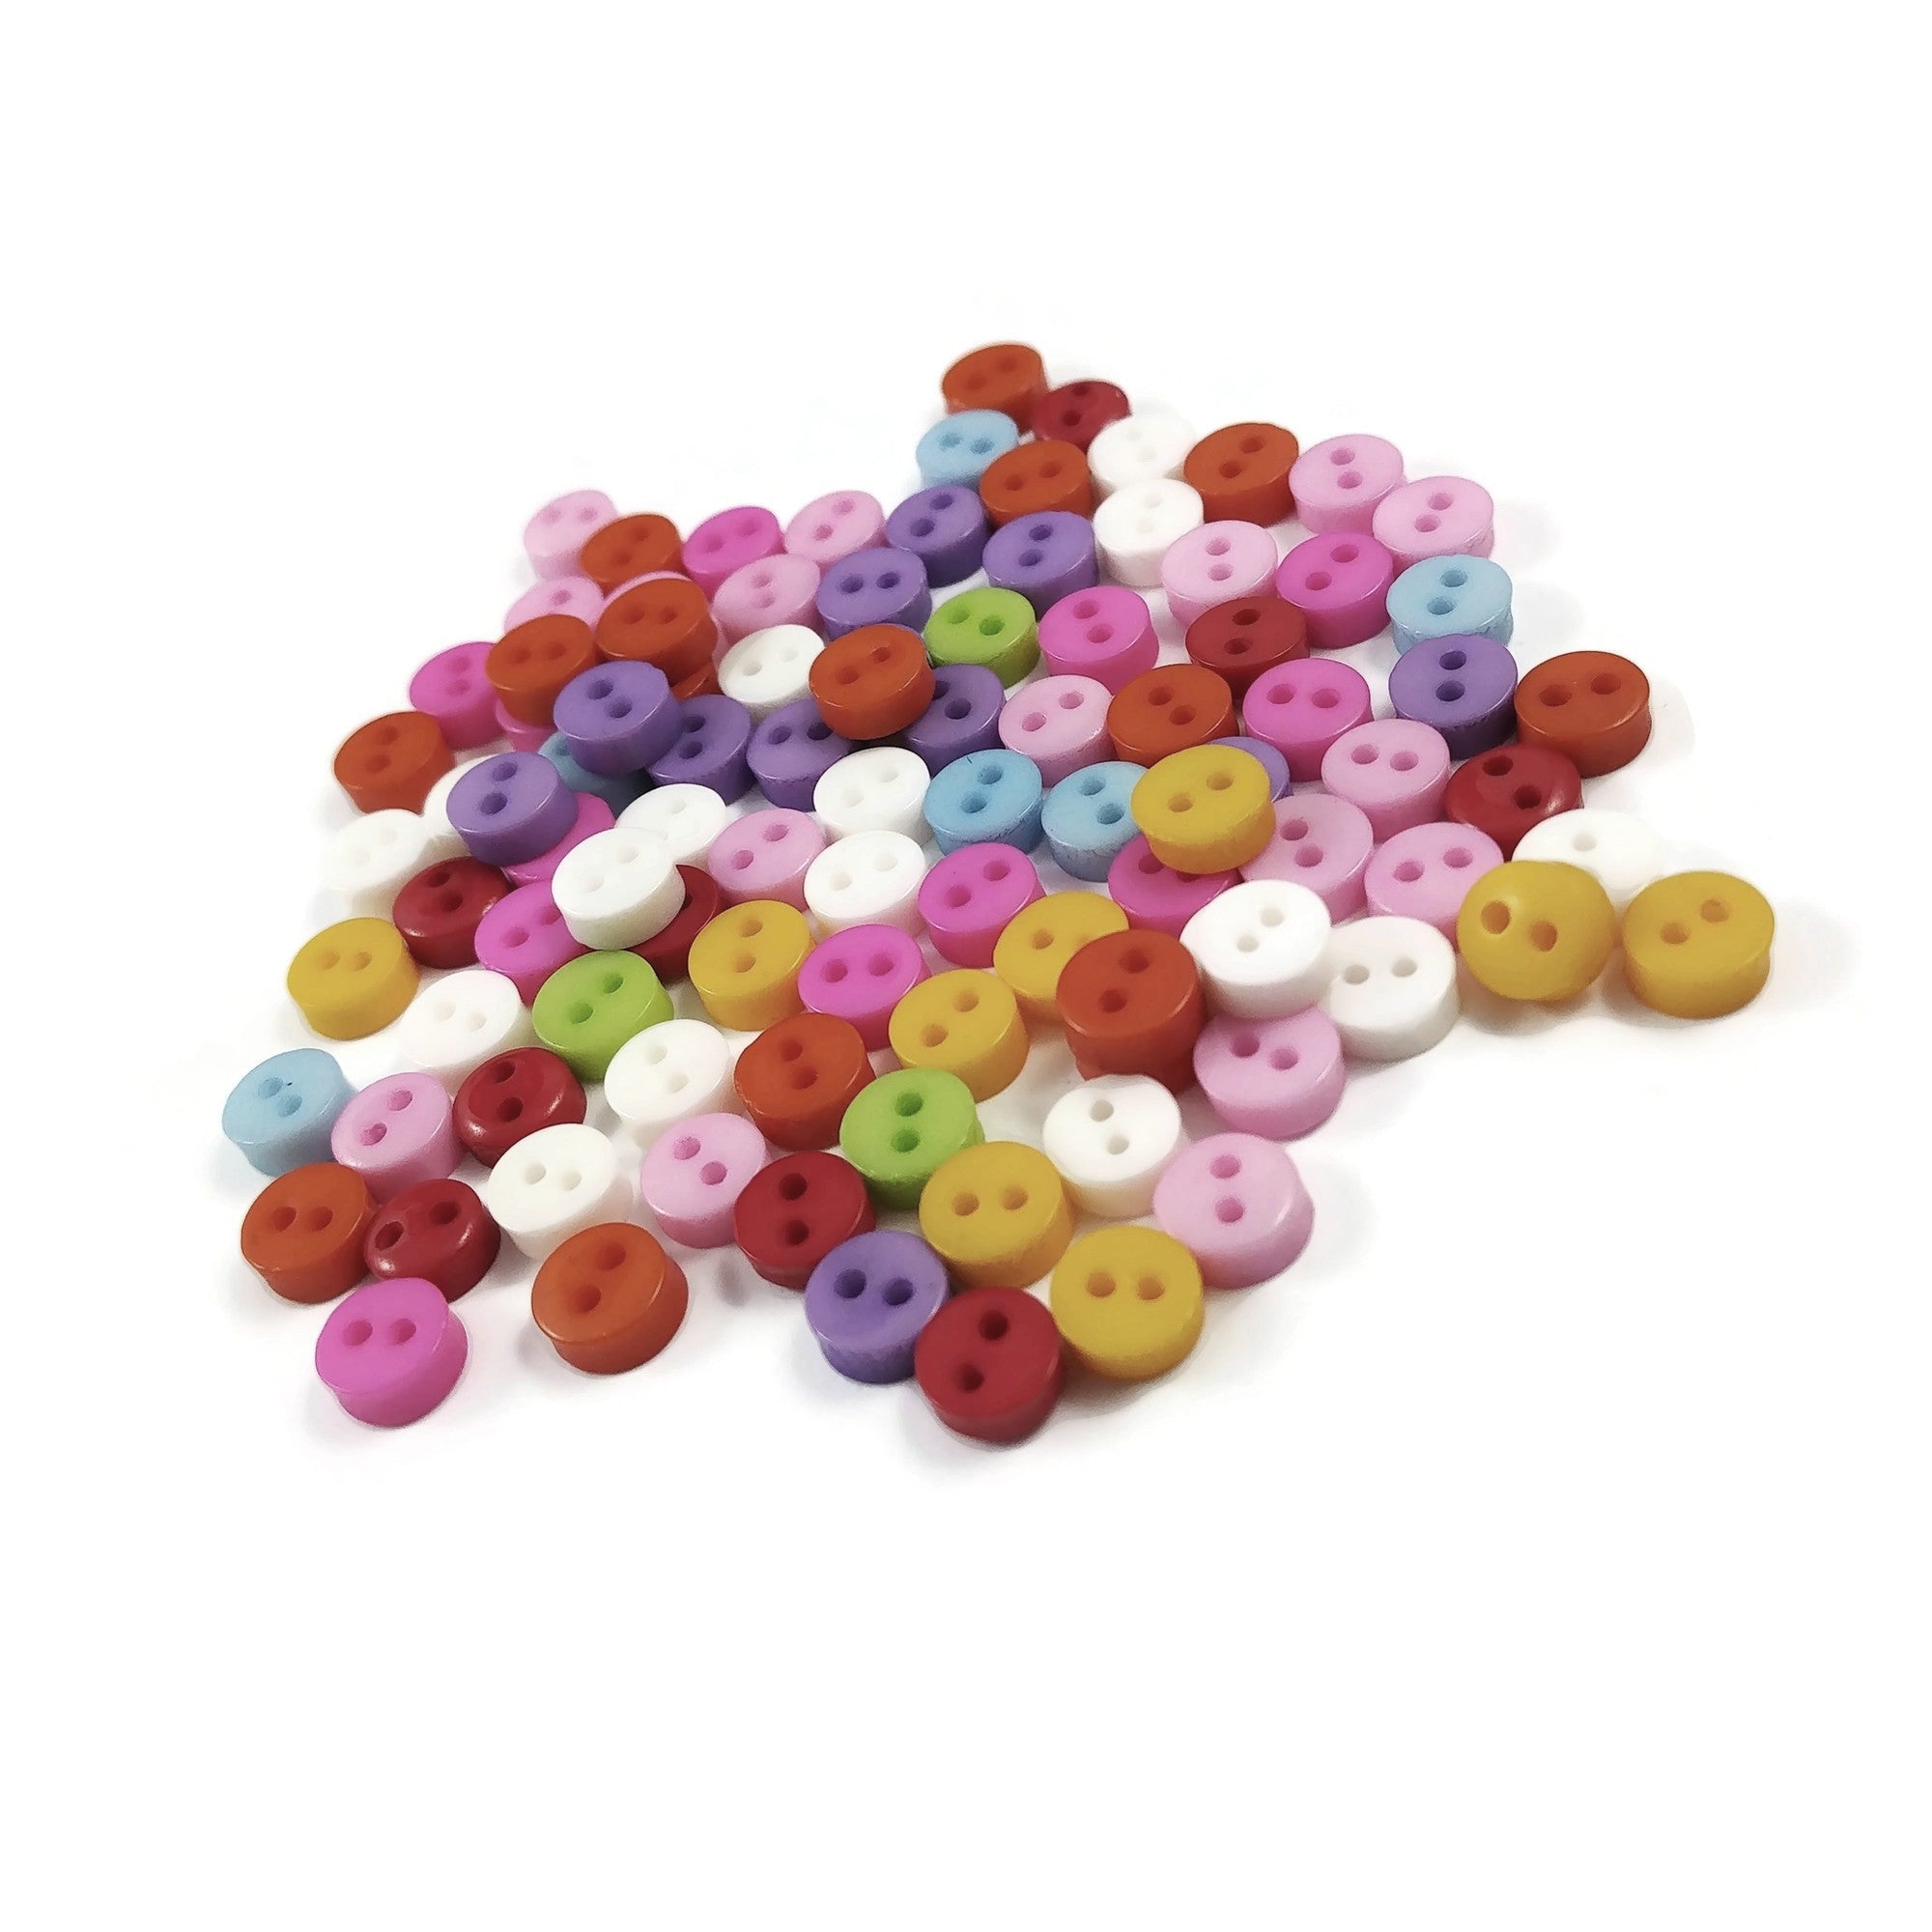 Mini mixed bright colors buttons - Bulk plastic sewing buttons 6mm